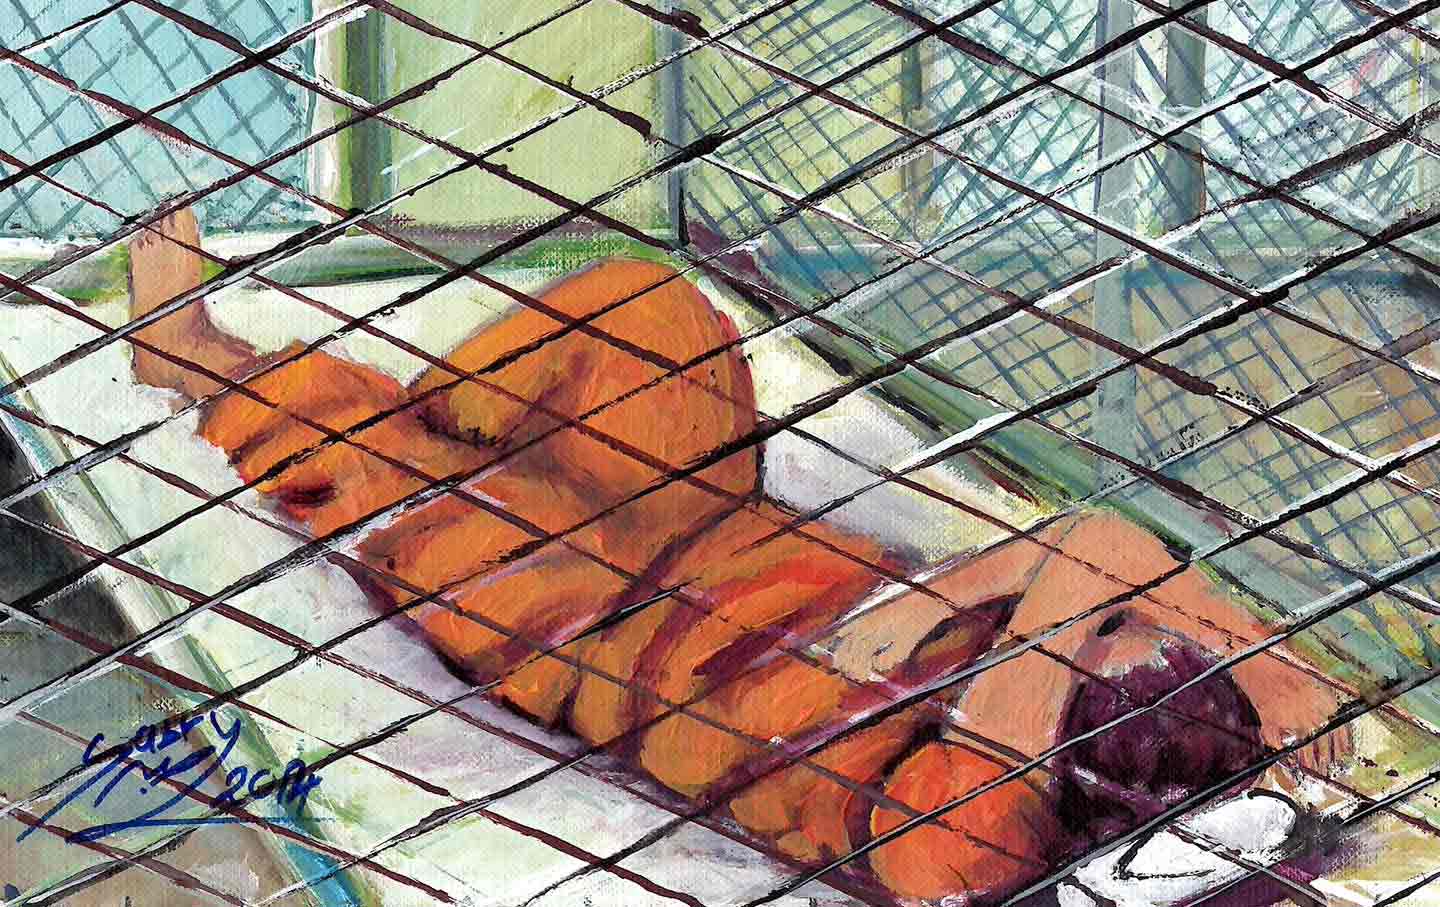 The Artwork of Guantánamo Detainees